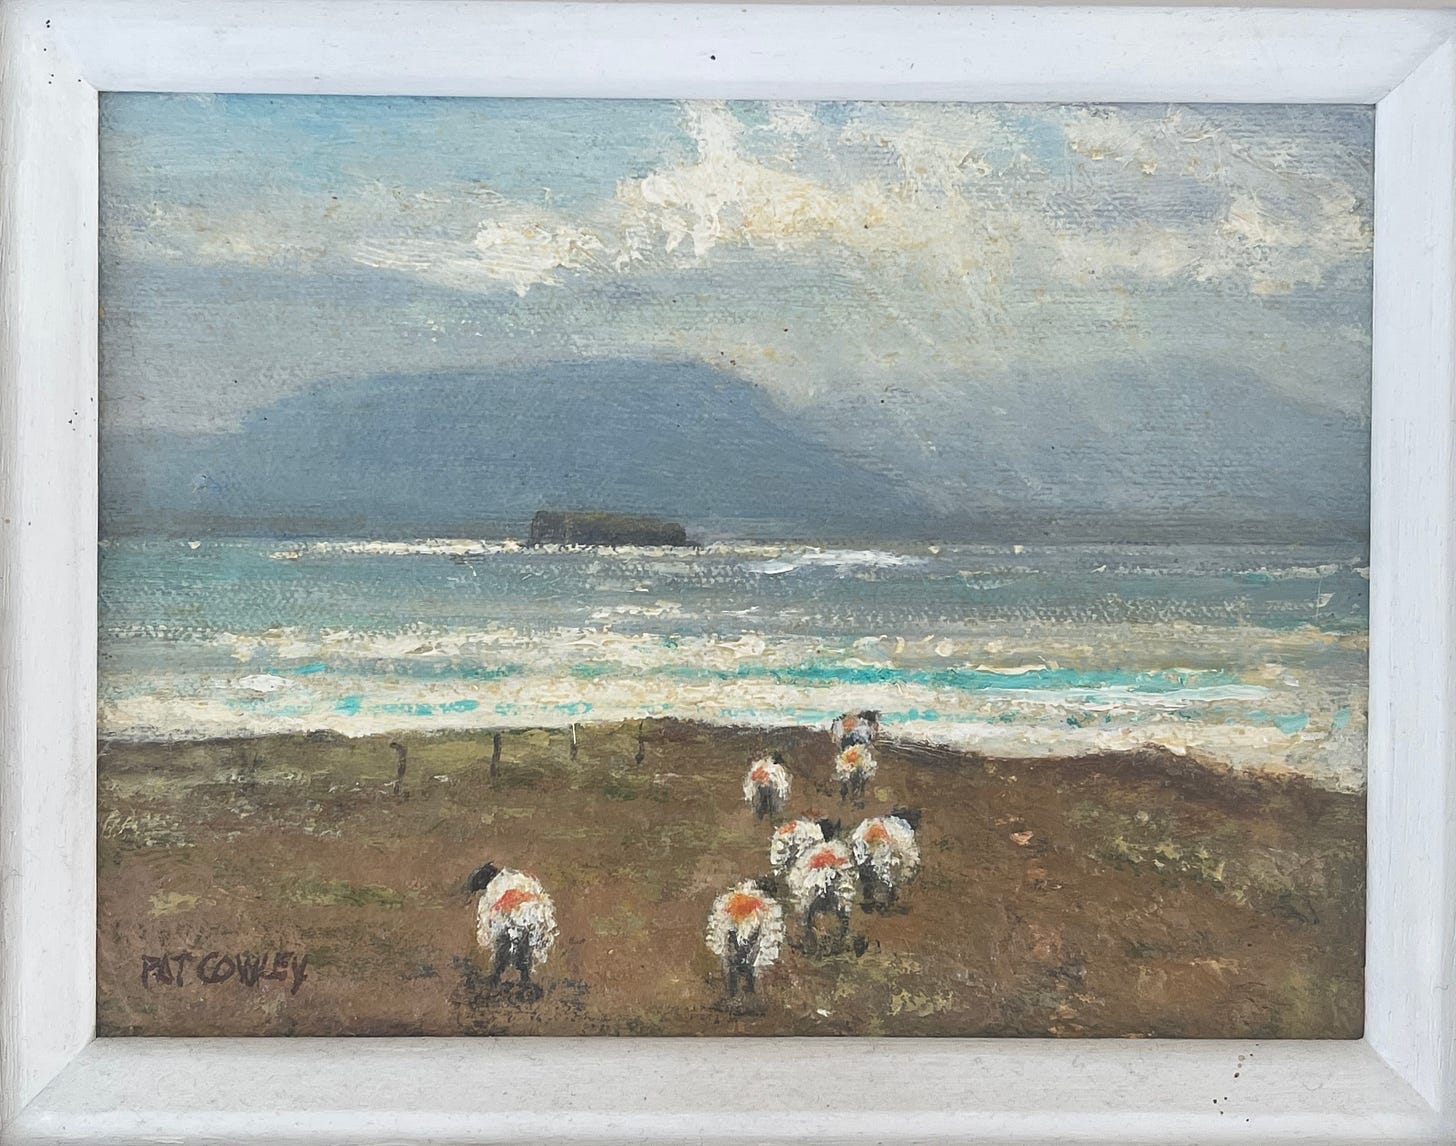 A picture of sheep by the sea by Pat Cowley